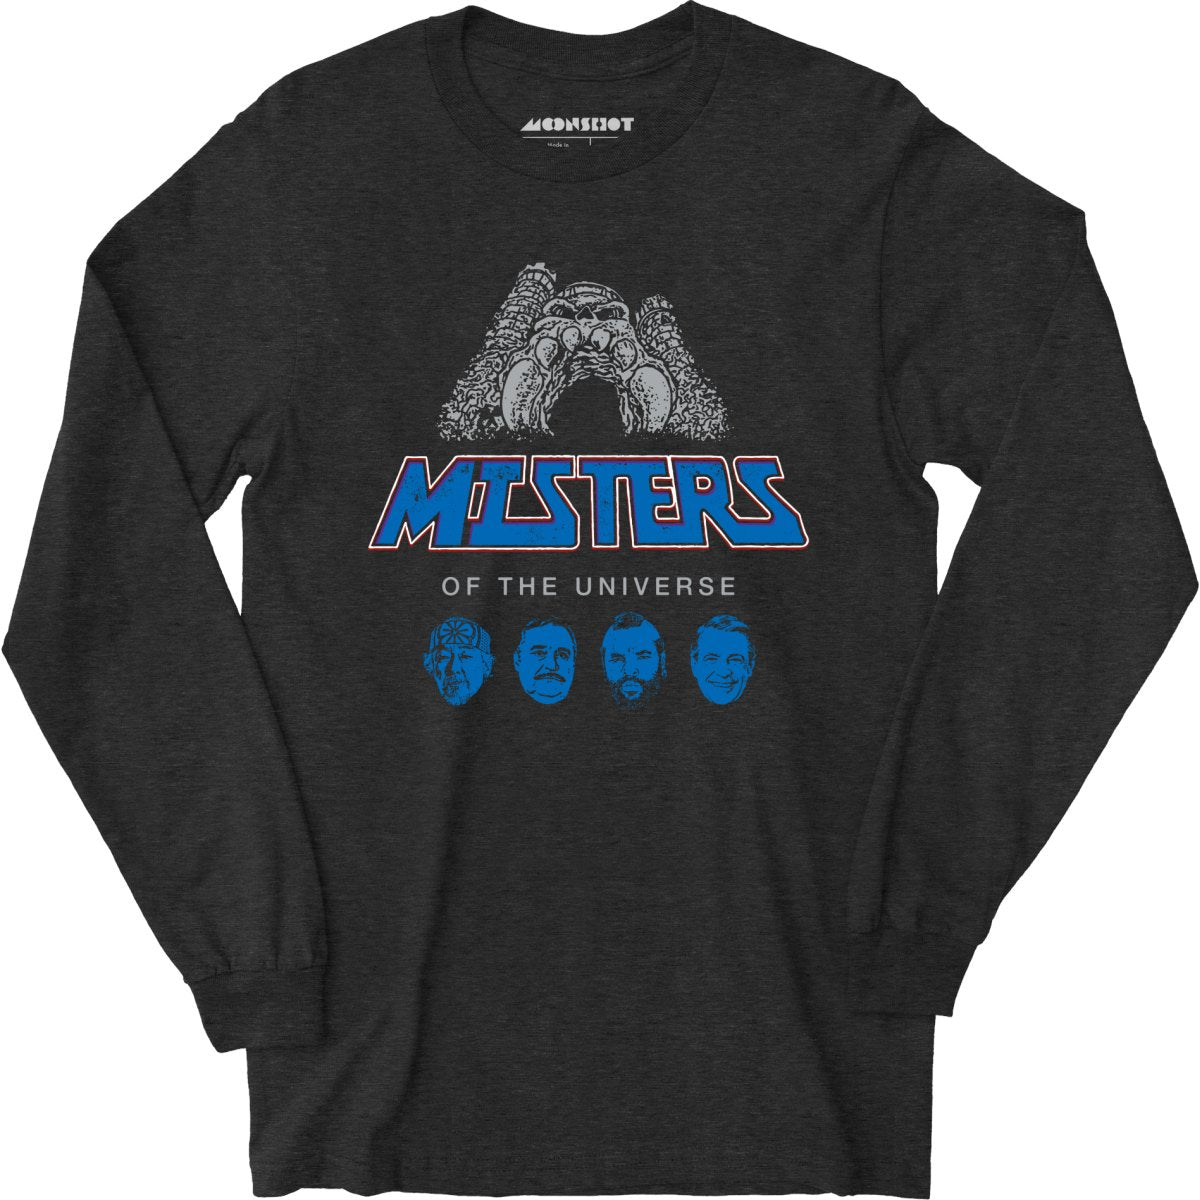 Misters of The Universe - Long Sleeve T-Shirt